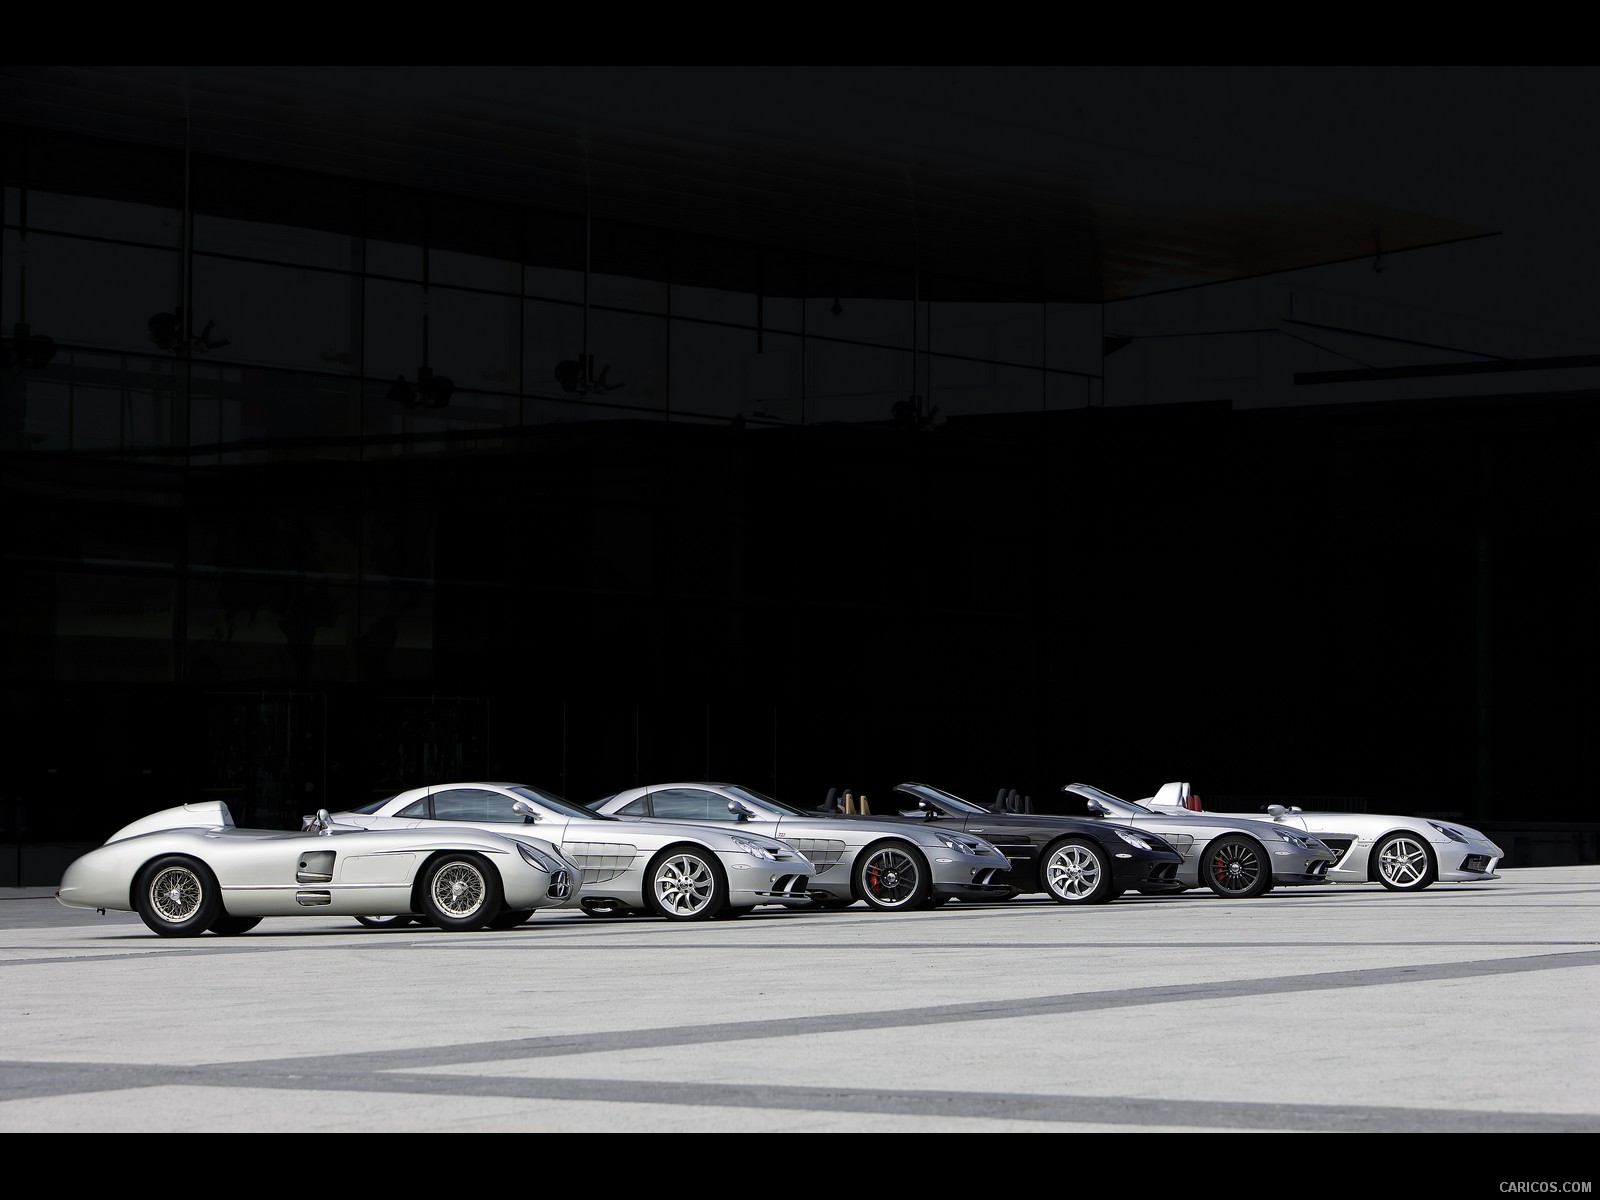 Mercedes-Benz SLR Stirling Moss and MB Lineup - , #53 of 54